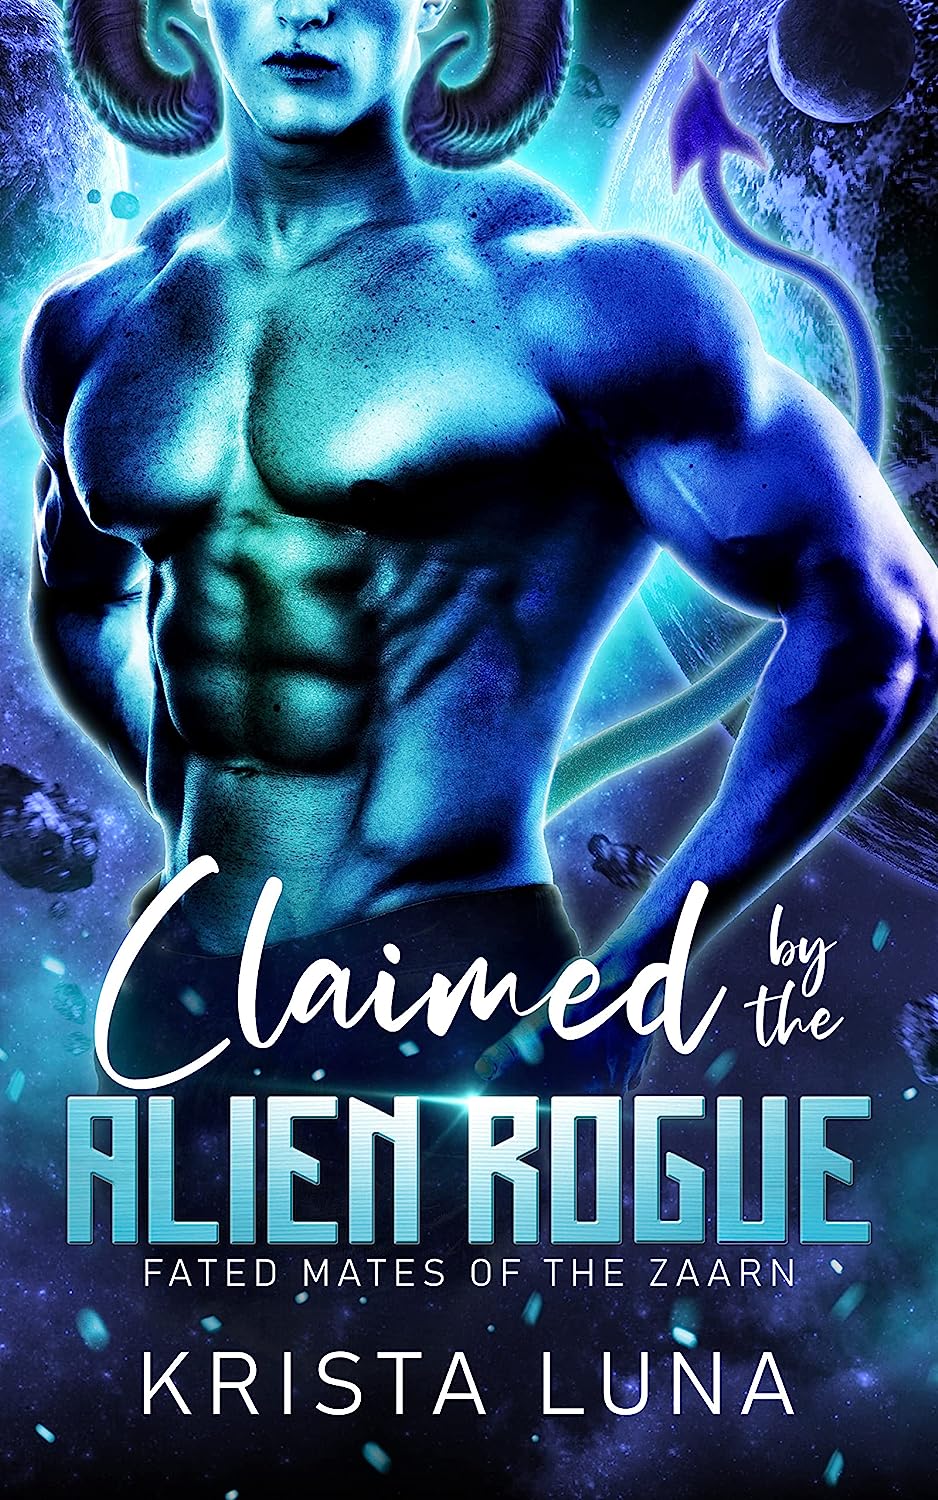 Claimed by the Alien Rogue by Krista Luna